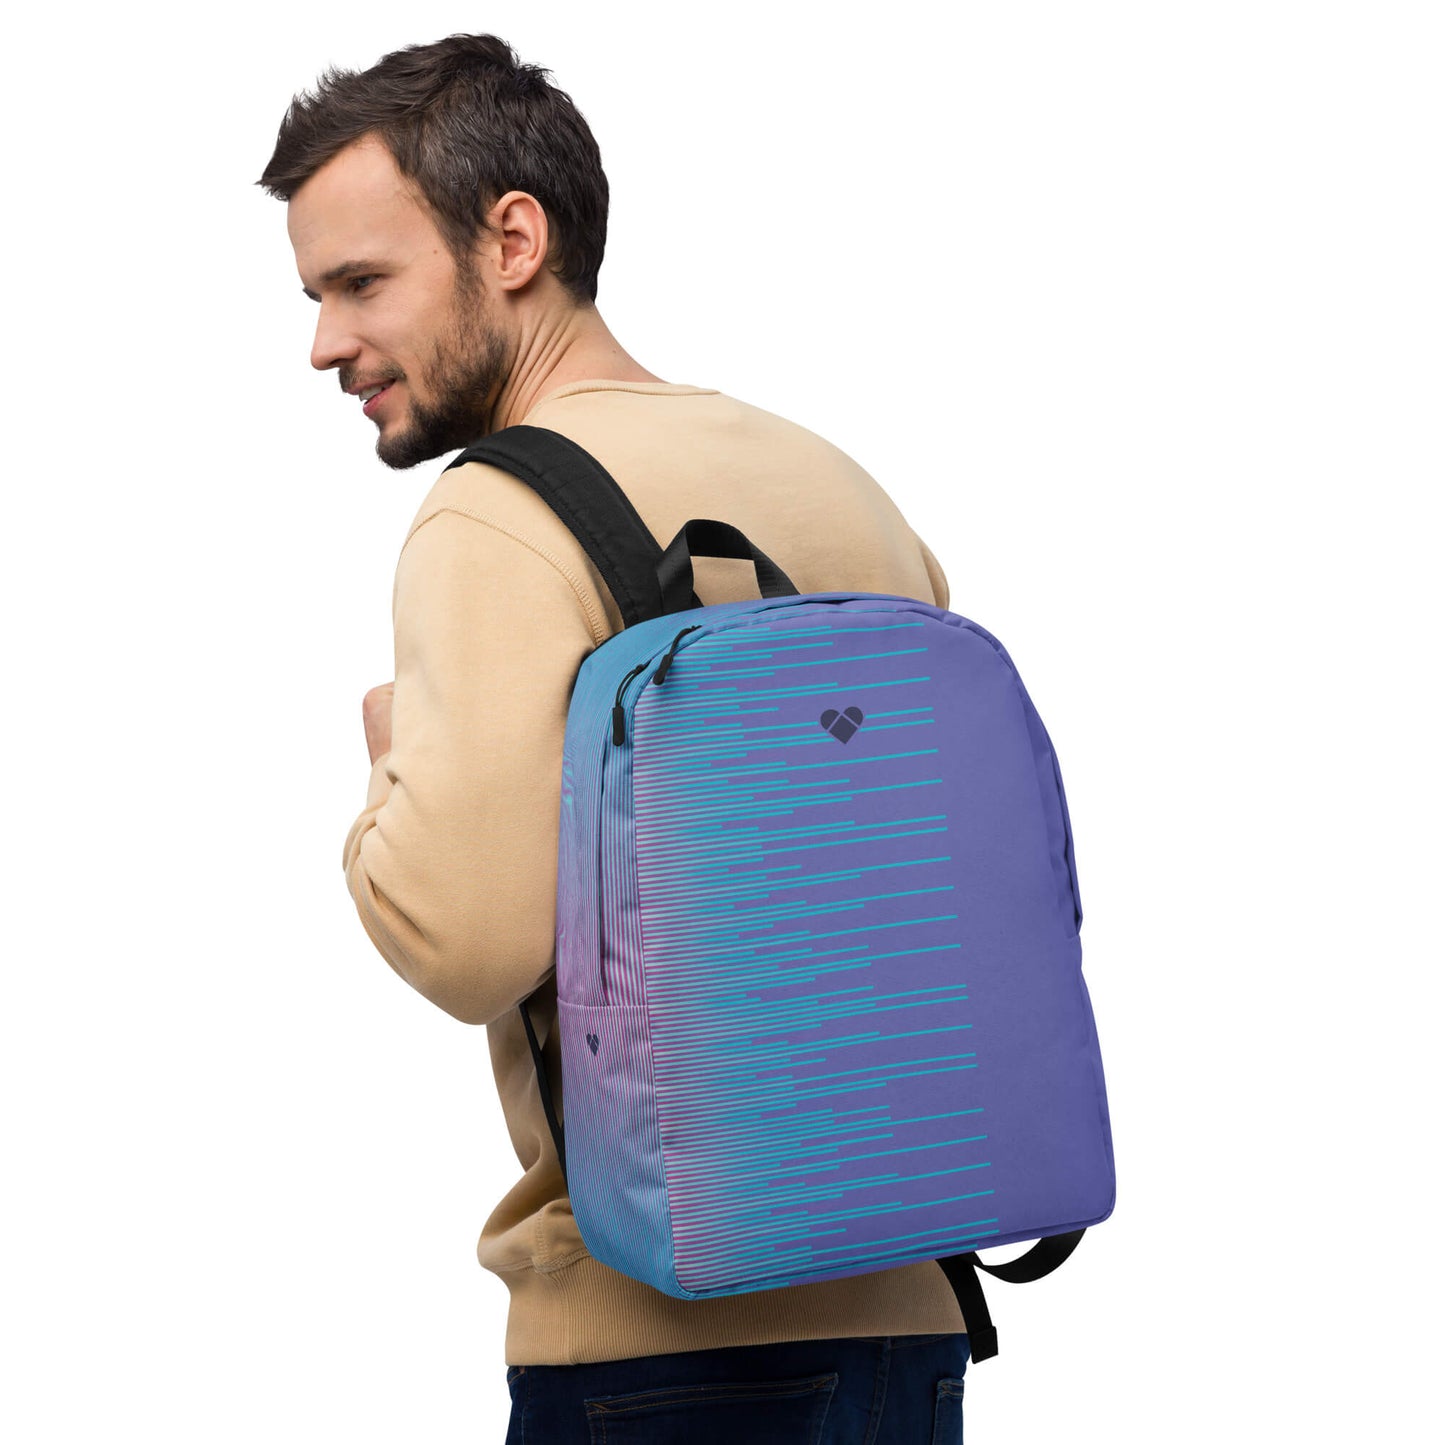 Fashionable Accessories: Periwinkle Dual Simplyheart Backpack